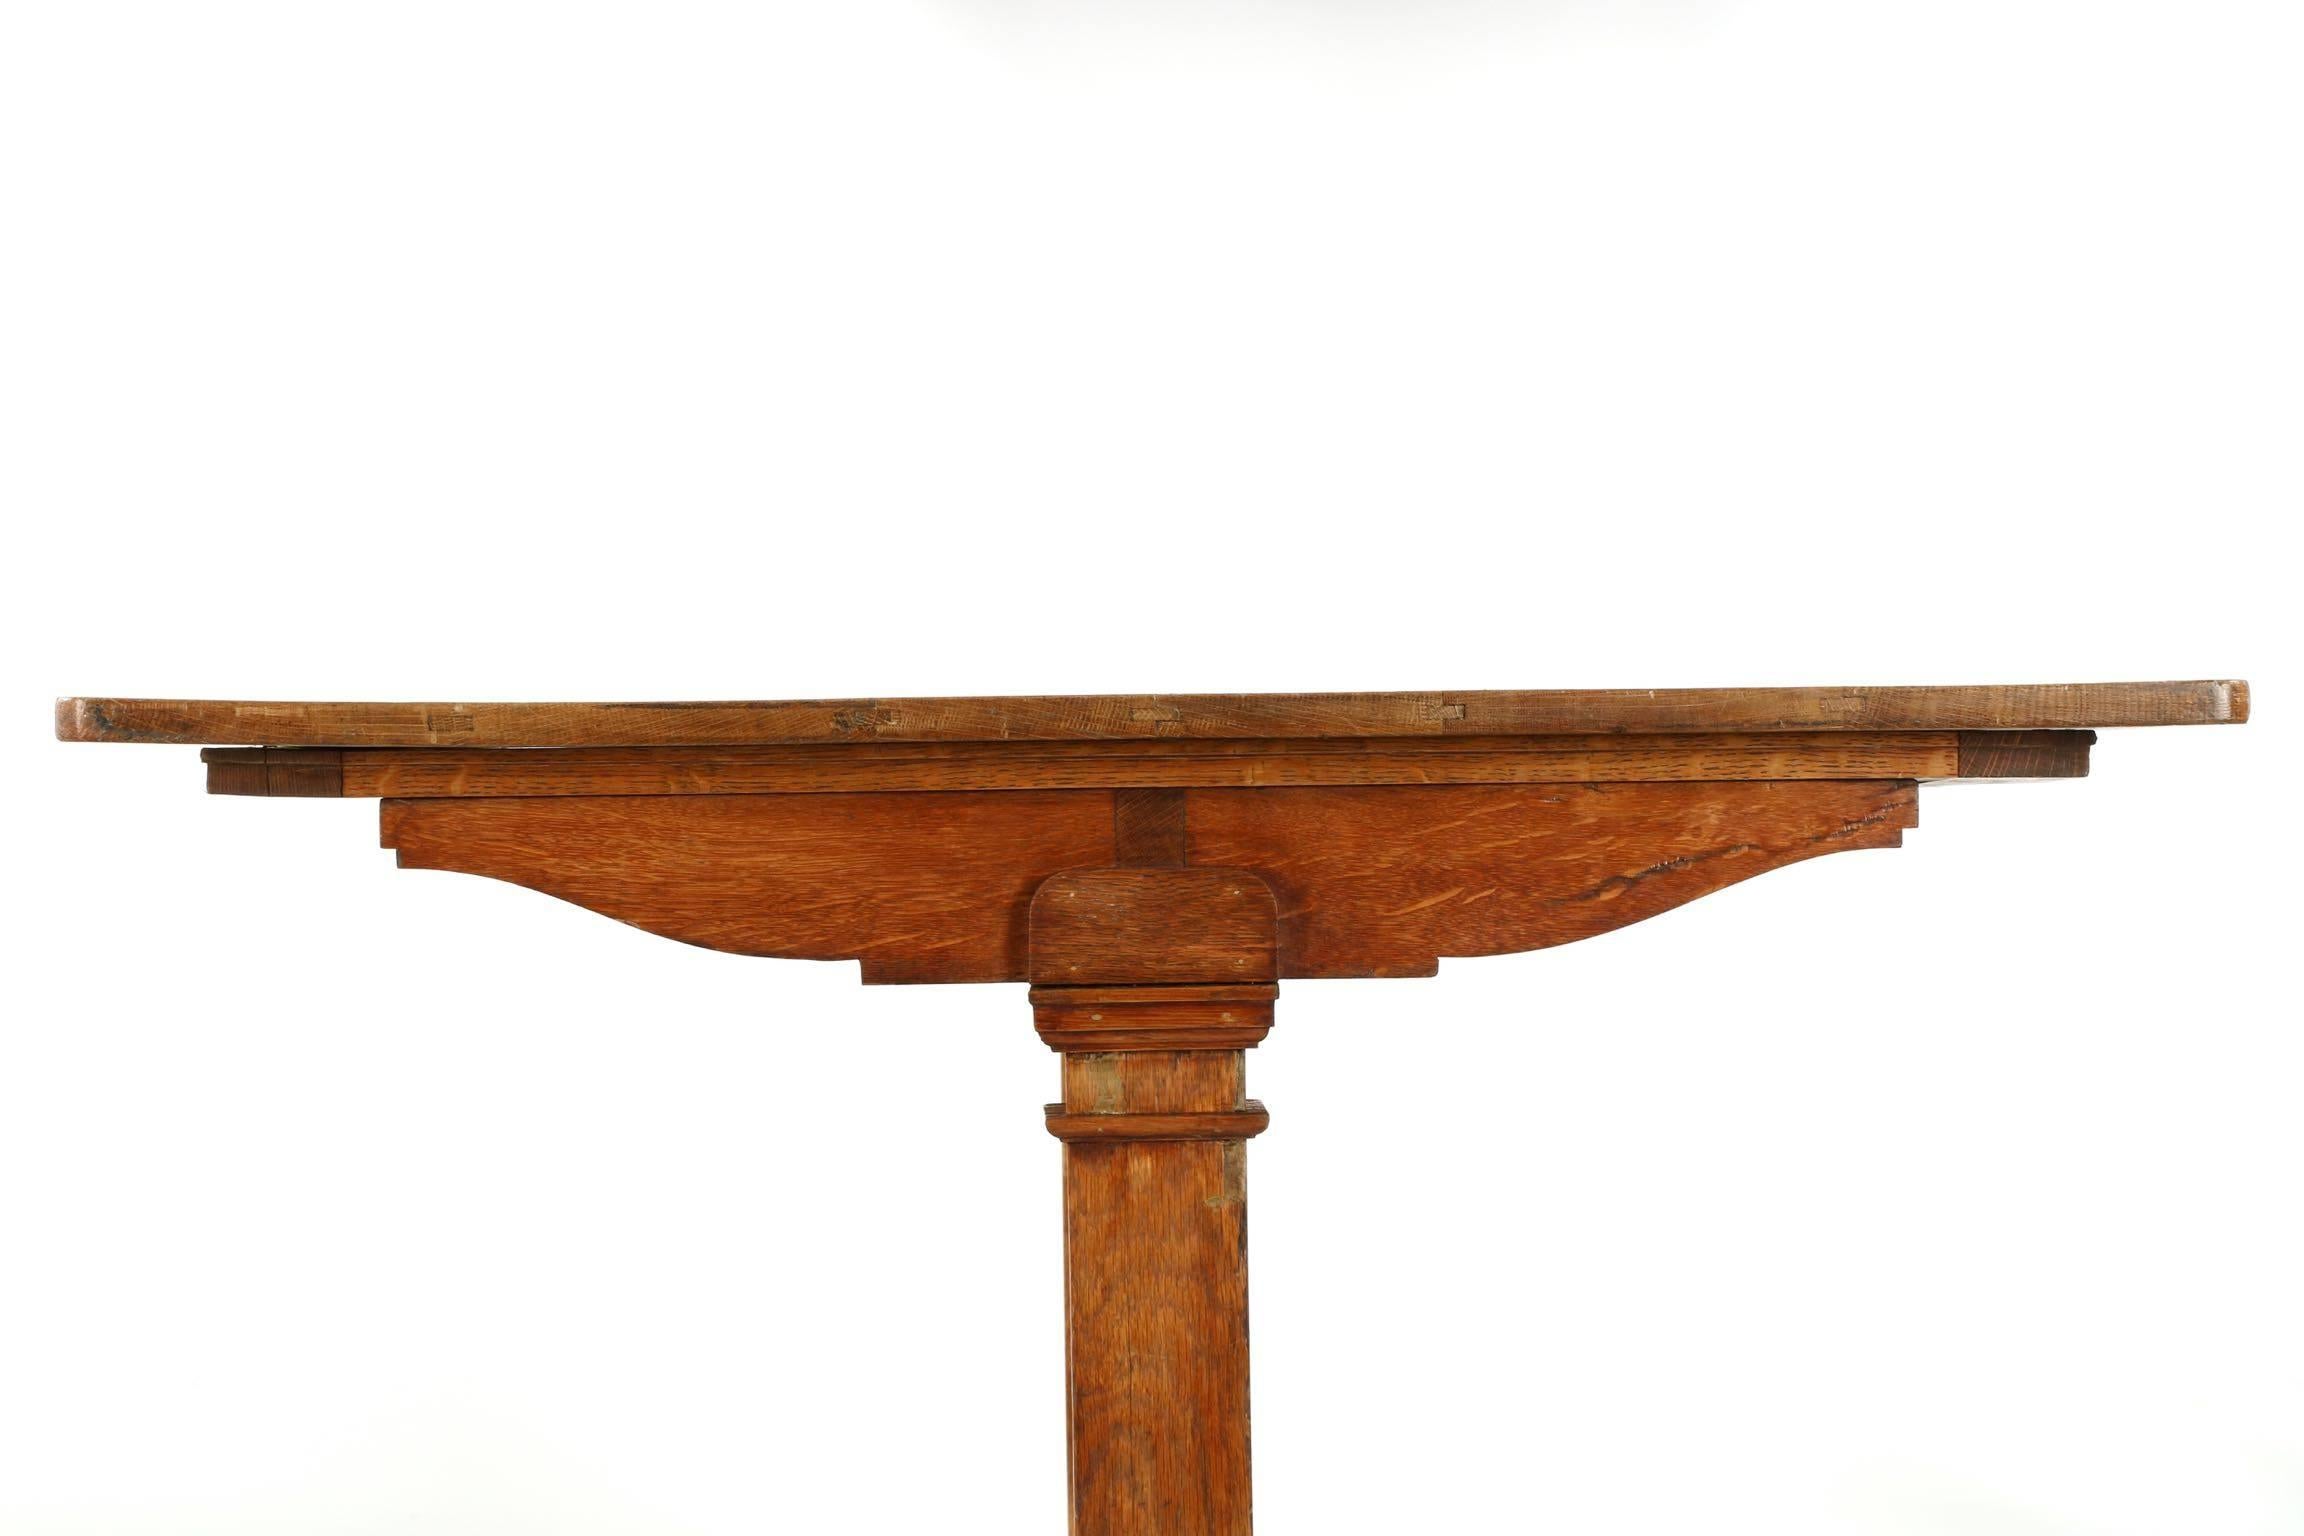 Arts and Crafts Worn Oak Arts & Crafts Antique Breakfast Dining Table circa 1890-1910